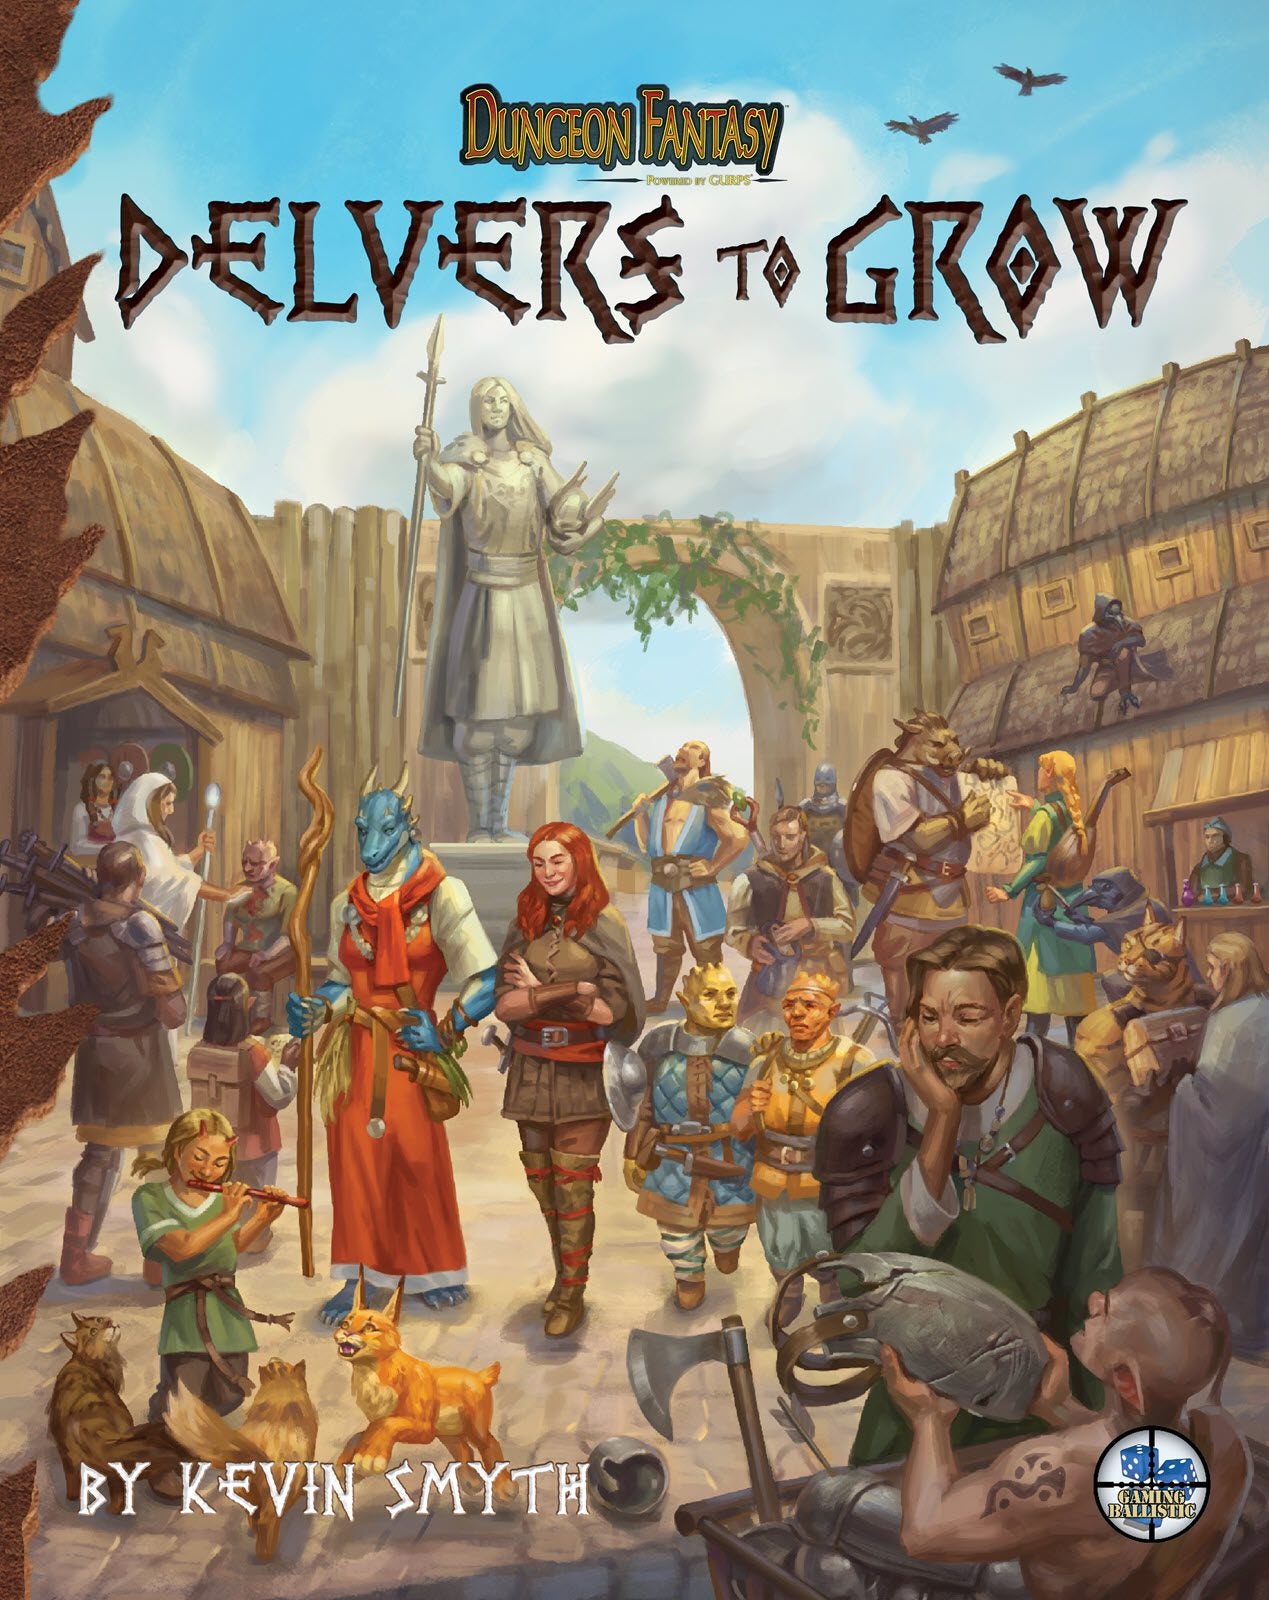 Preorder the Game to Grow book! - Game to Grow